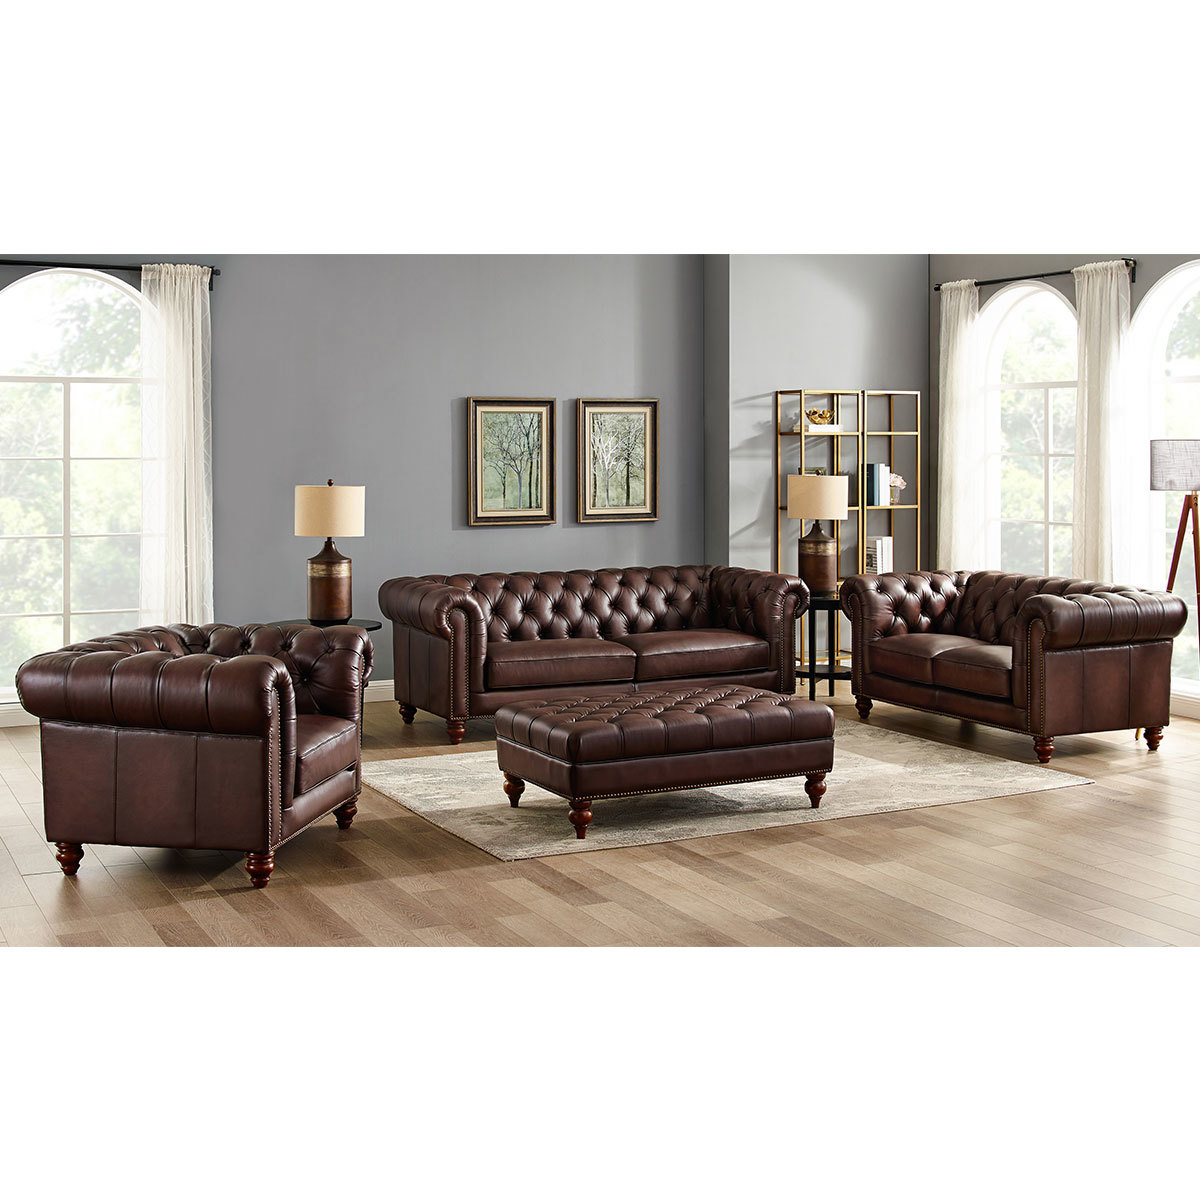 Allington Brown Leather Chesterfield Footstool